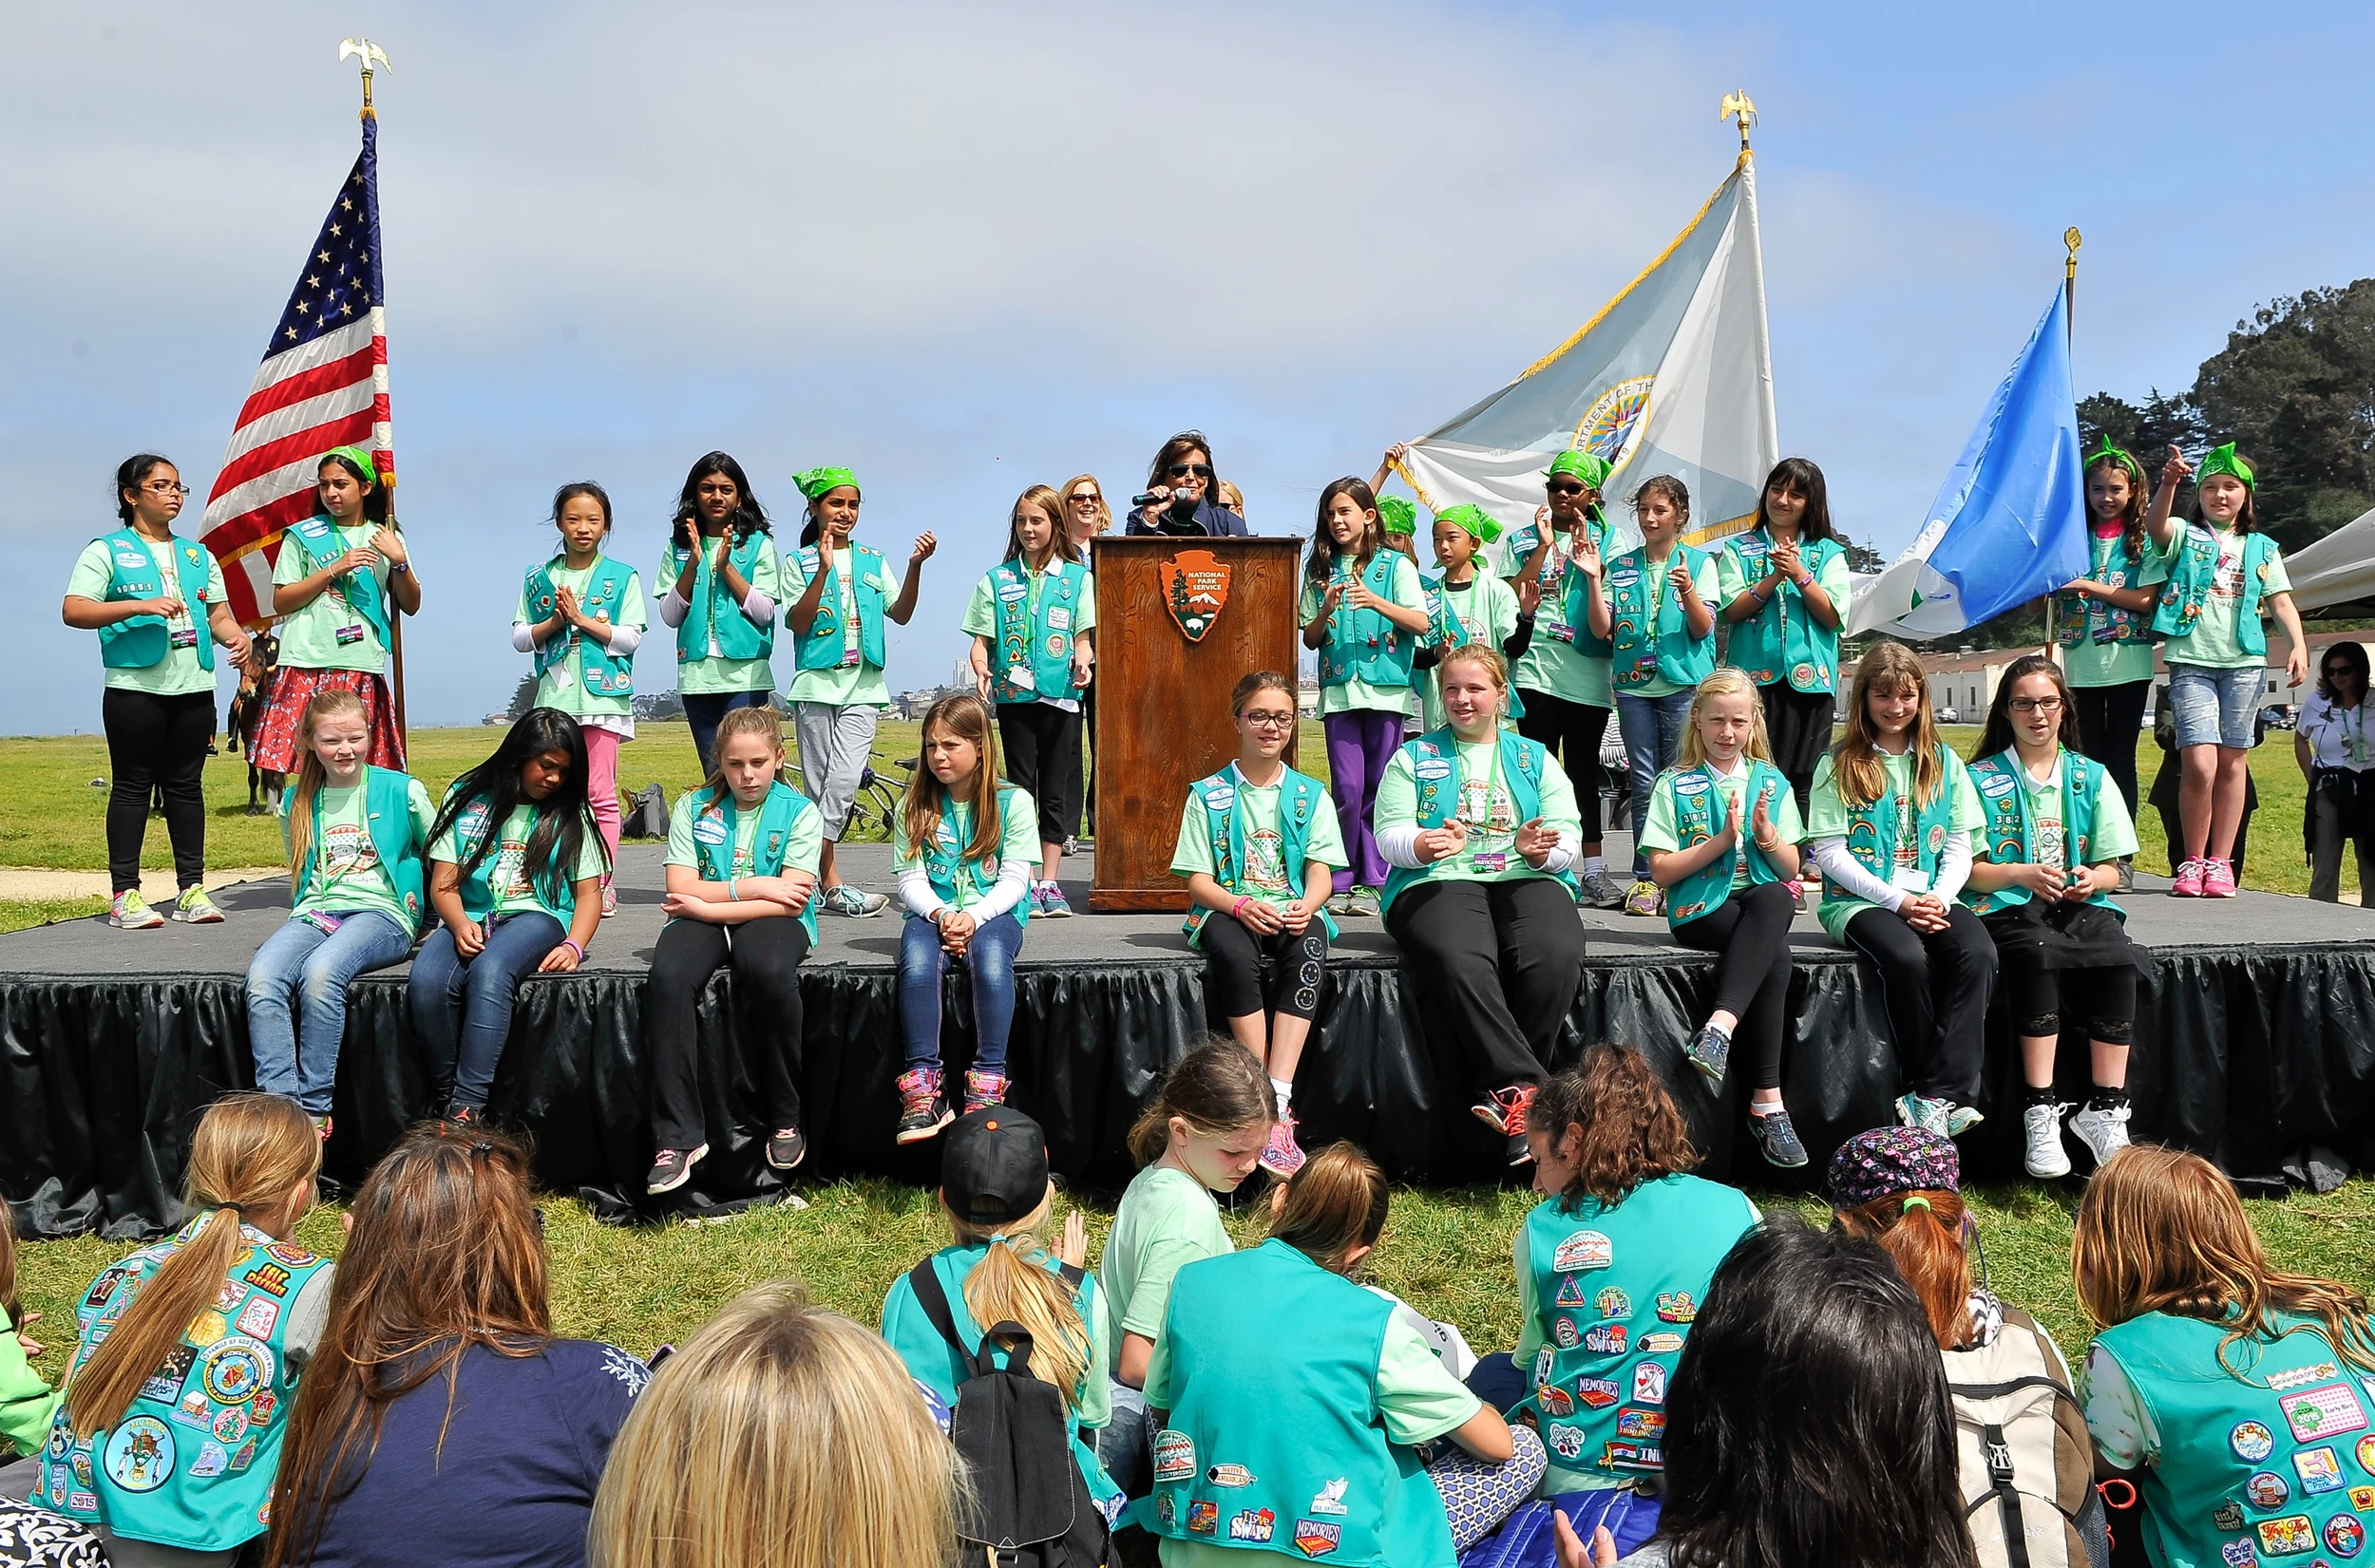 Boy Scouts Welcoming Girl Scouts